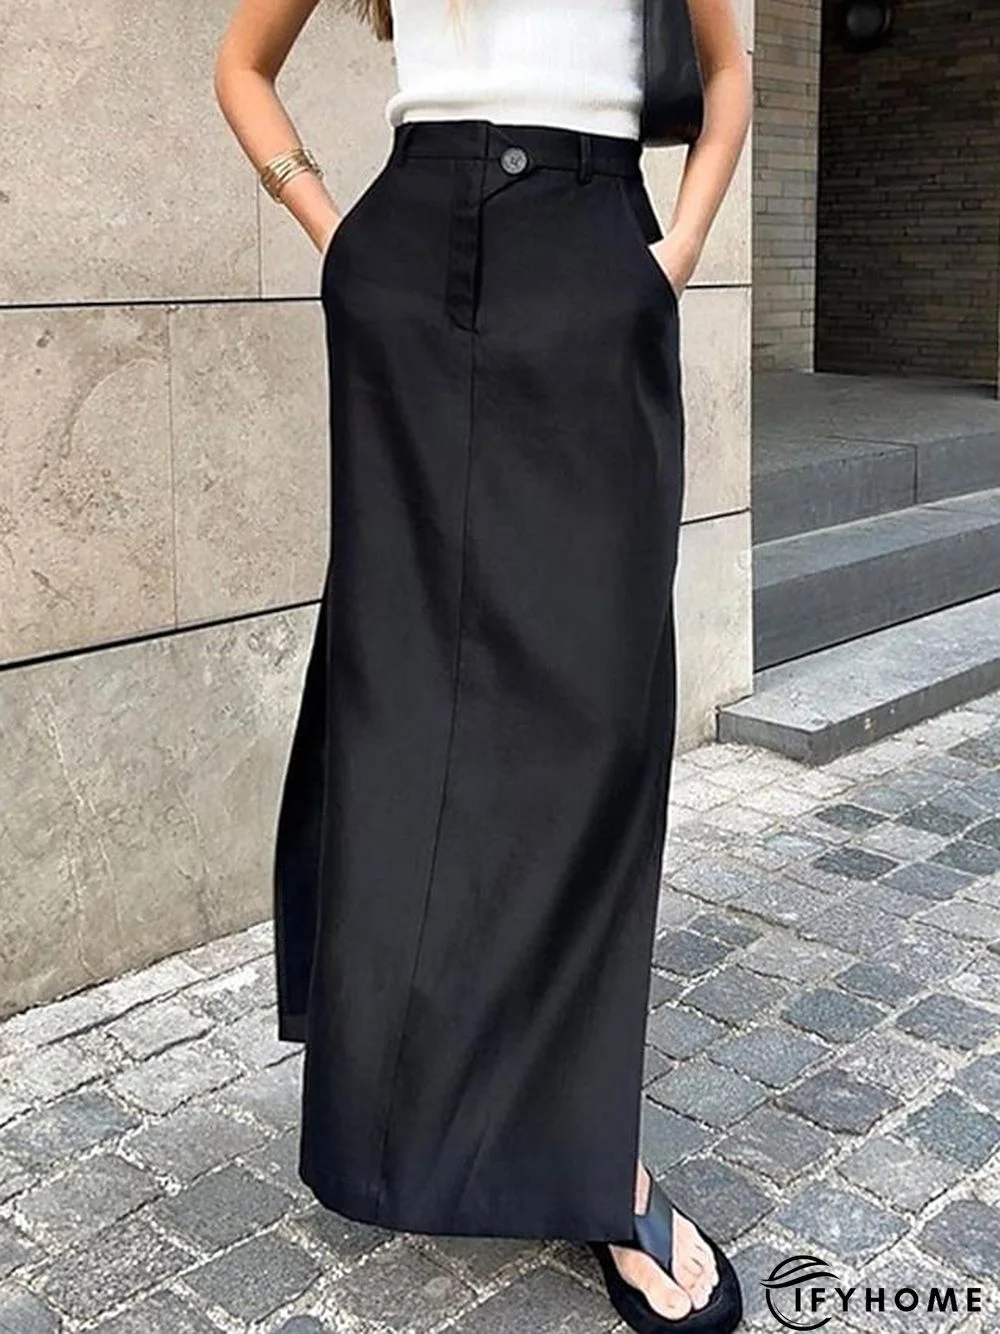 Women's Pencil Work Skirts Long Skirt Maxi Knit Black Skirts Pocket Split Fashion Casual Daily Weekend S M L | IFYHOME